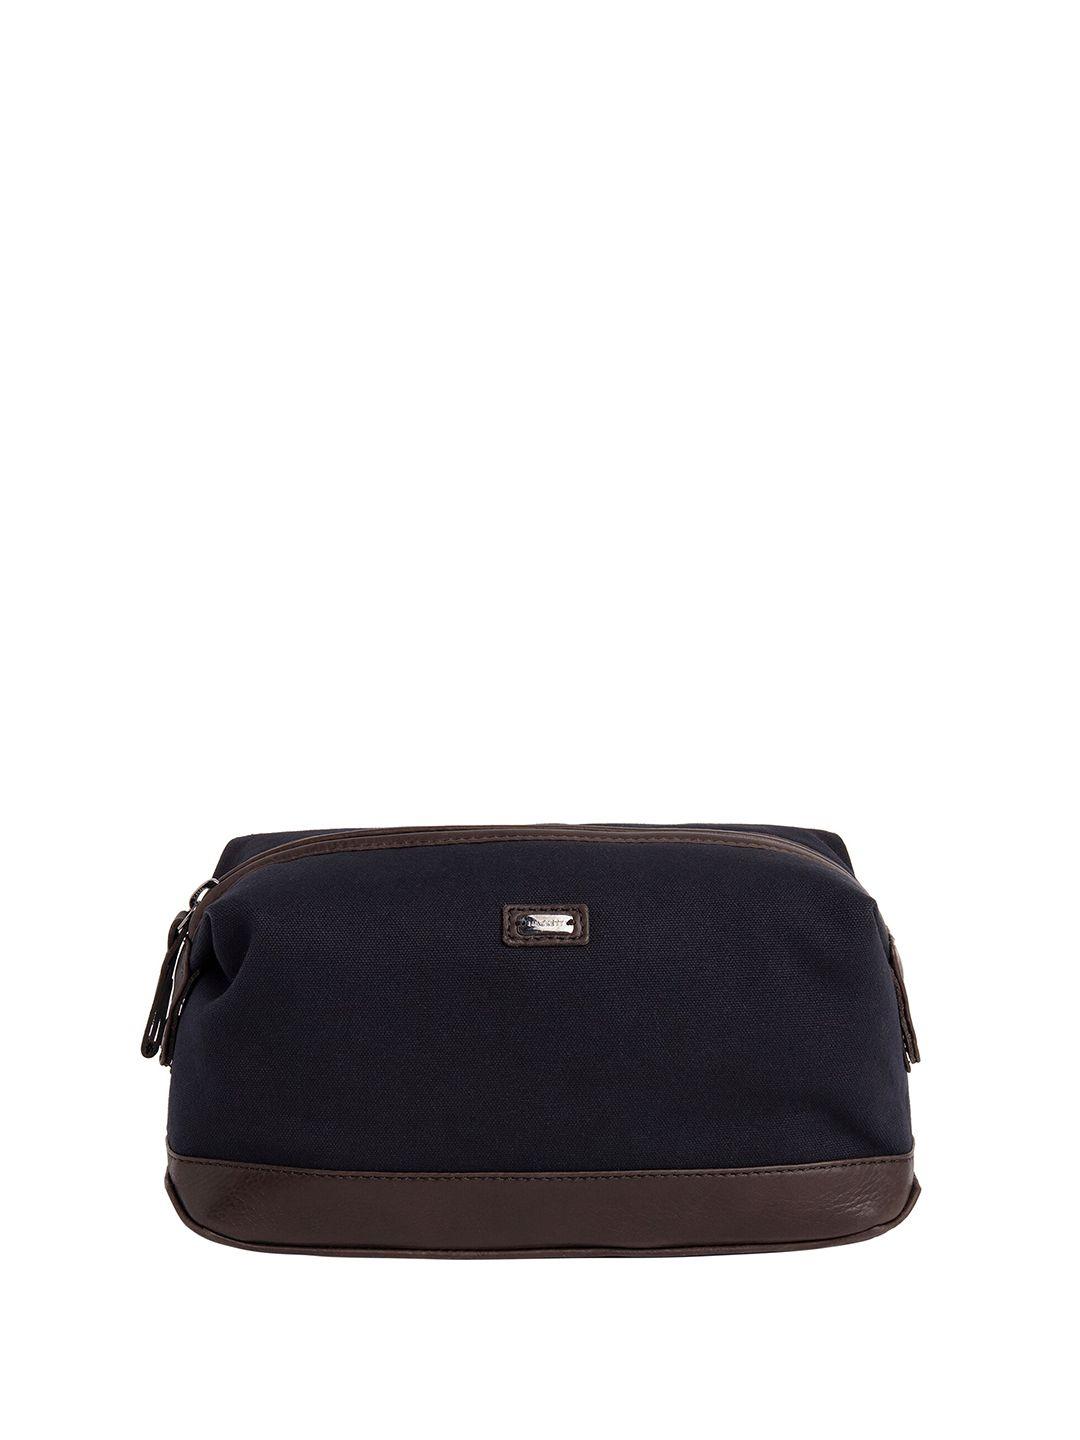 hackett london structured toiletry bag